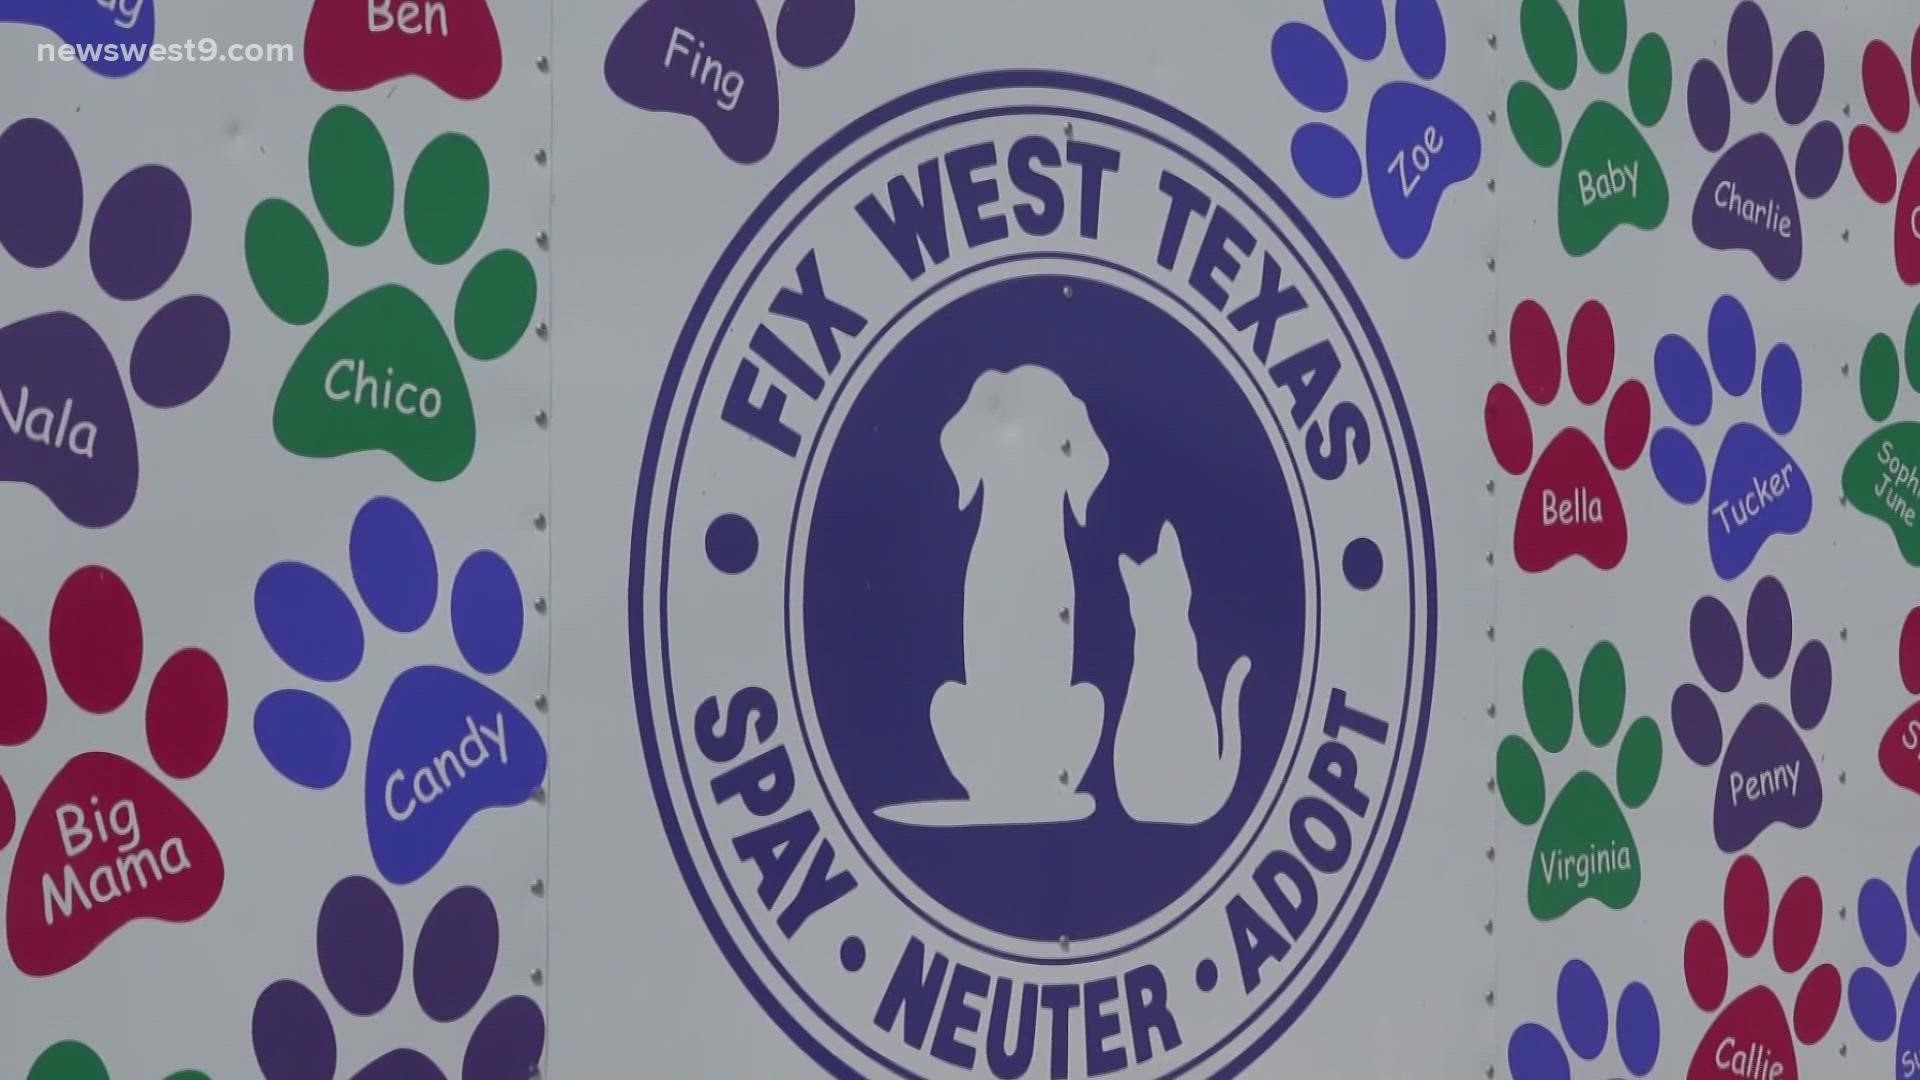 If these West Texans come up with innovative ways to extend the dollar, it could mean all the difference for our furry friends.